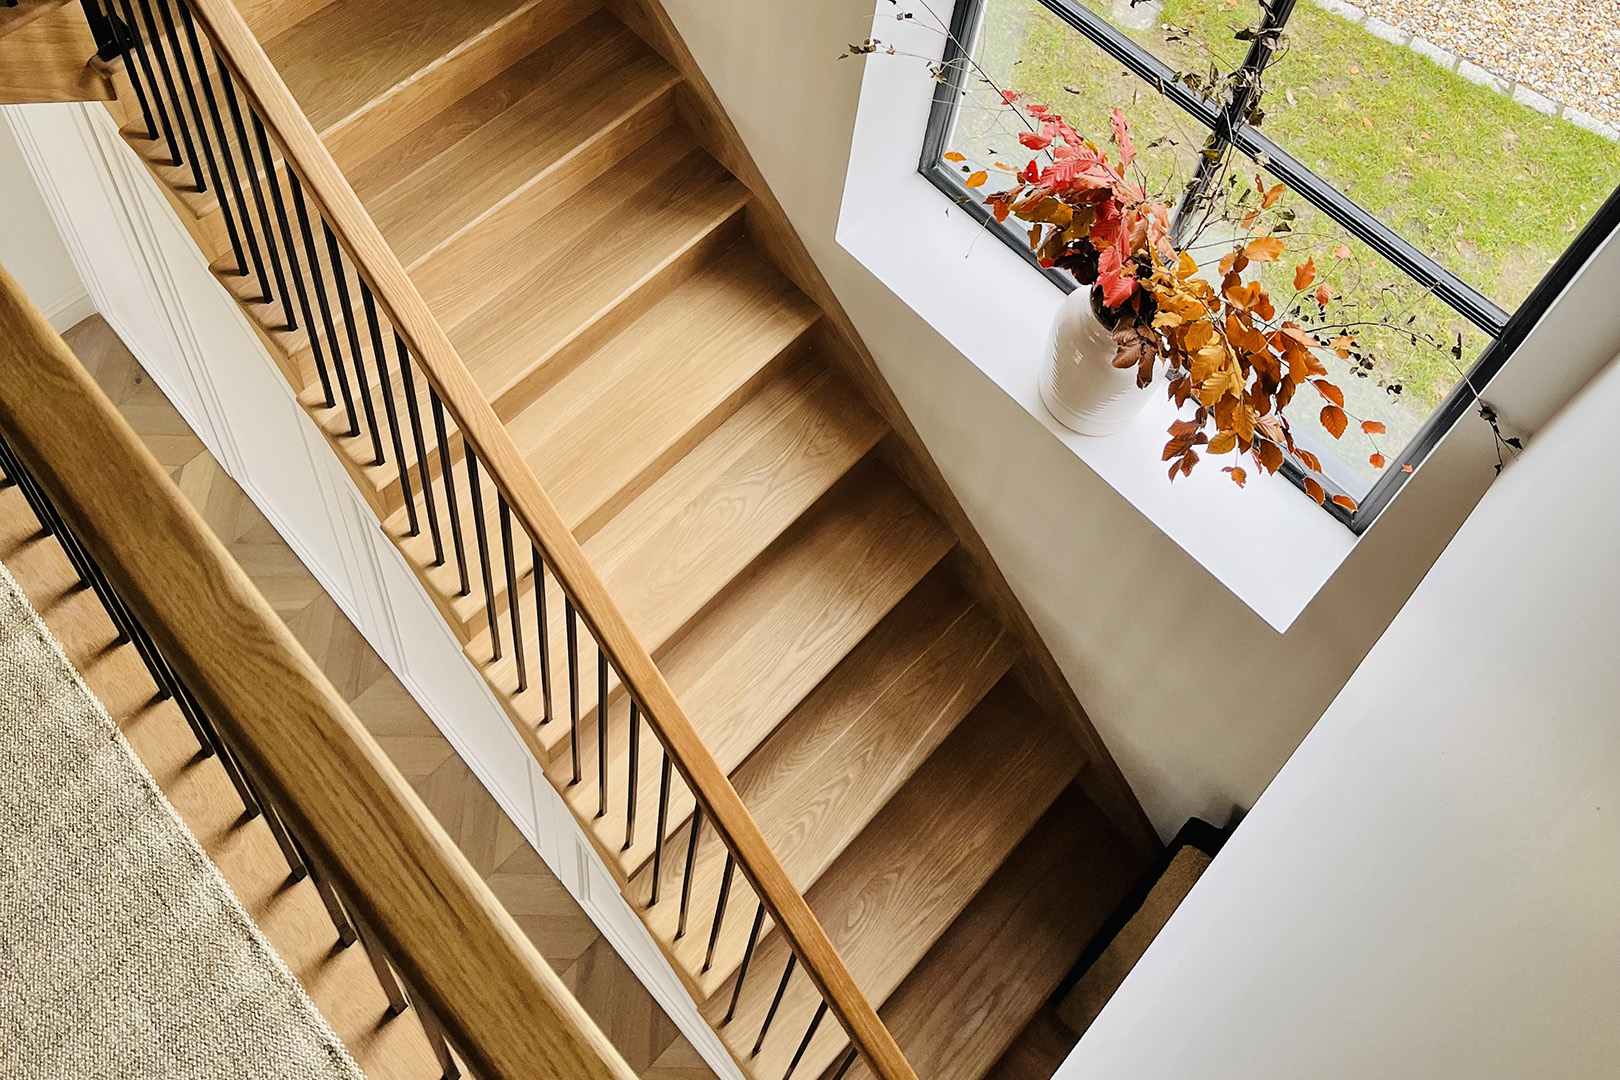 birds eye view of oak staircase with black steel balustrade and oak handrail